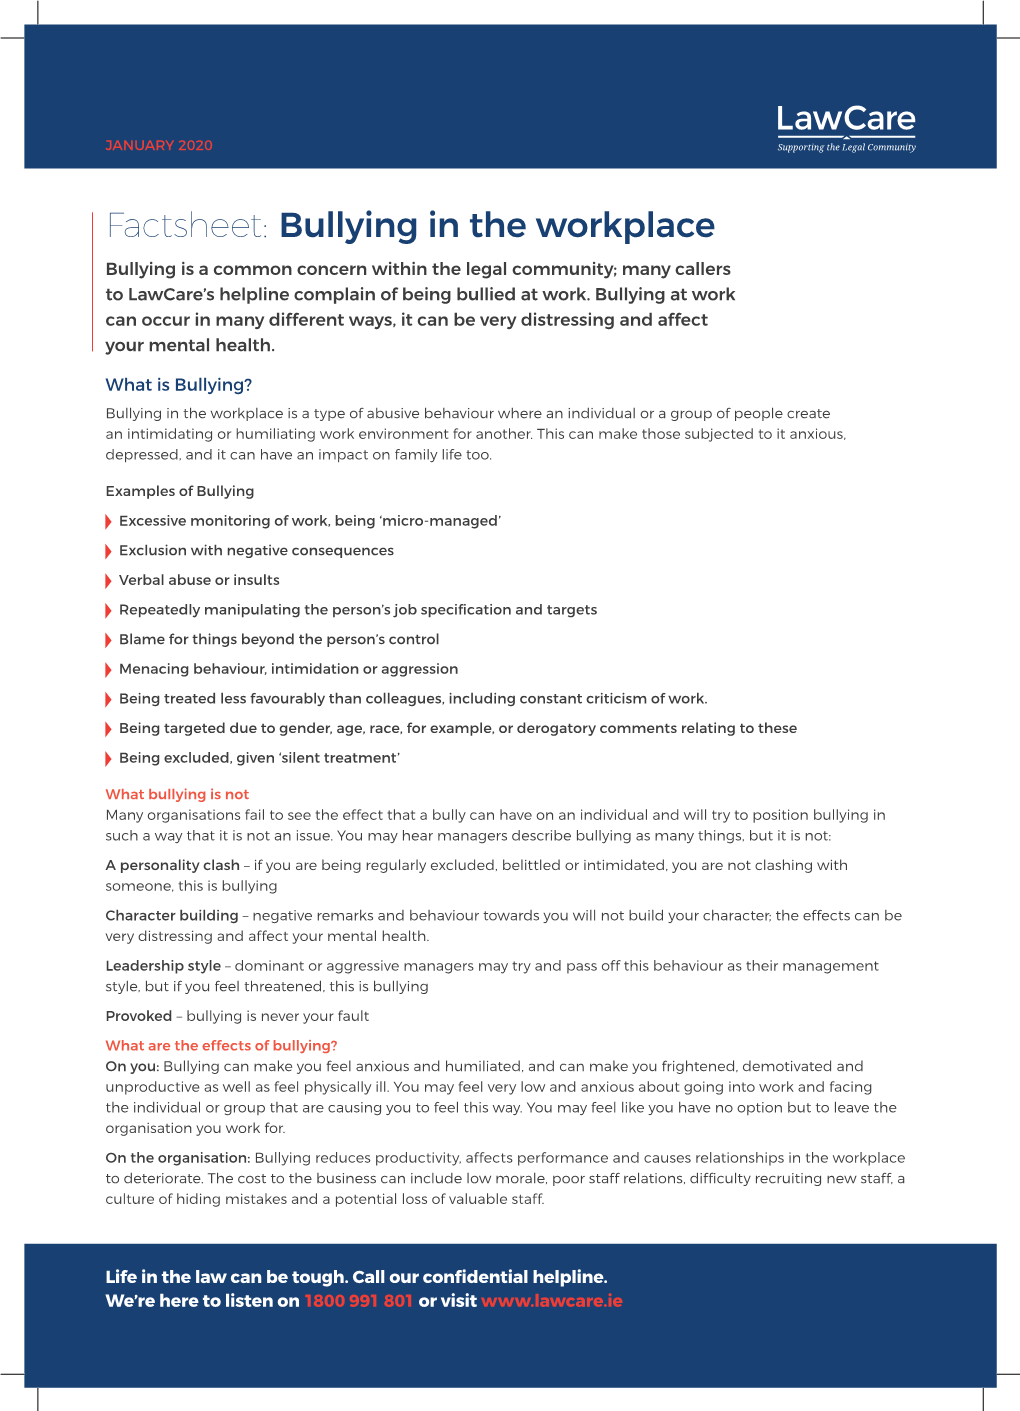 Factsheet: Bullying in the Workplace Bullying Is a Common Concern Within the Legal Community; Many Callers to Lawcare’S Helpline Complain of Being Bullied at Work